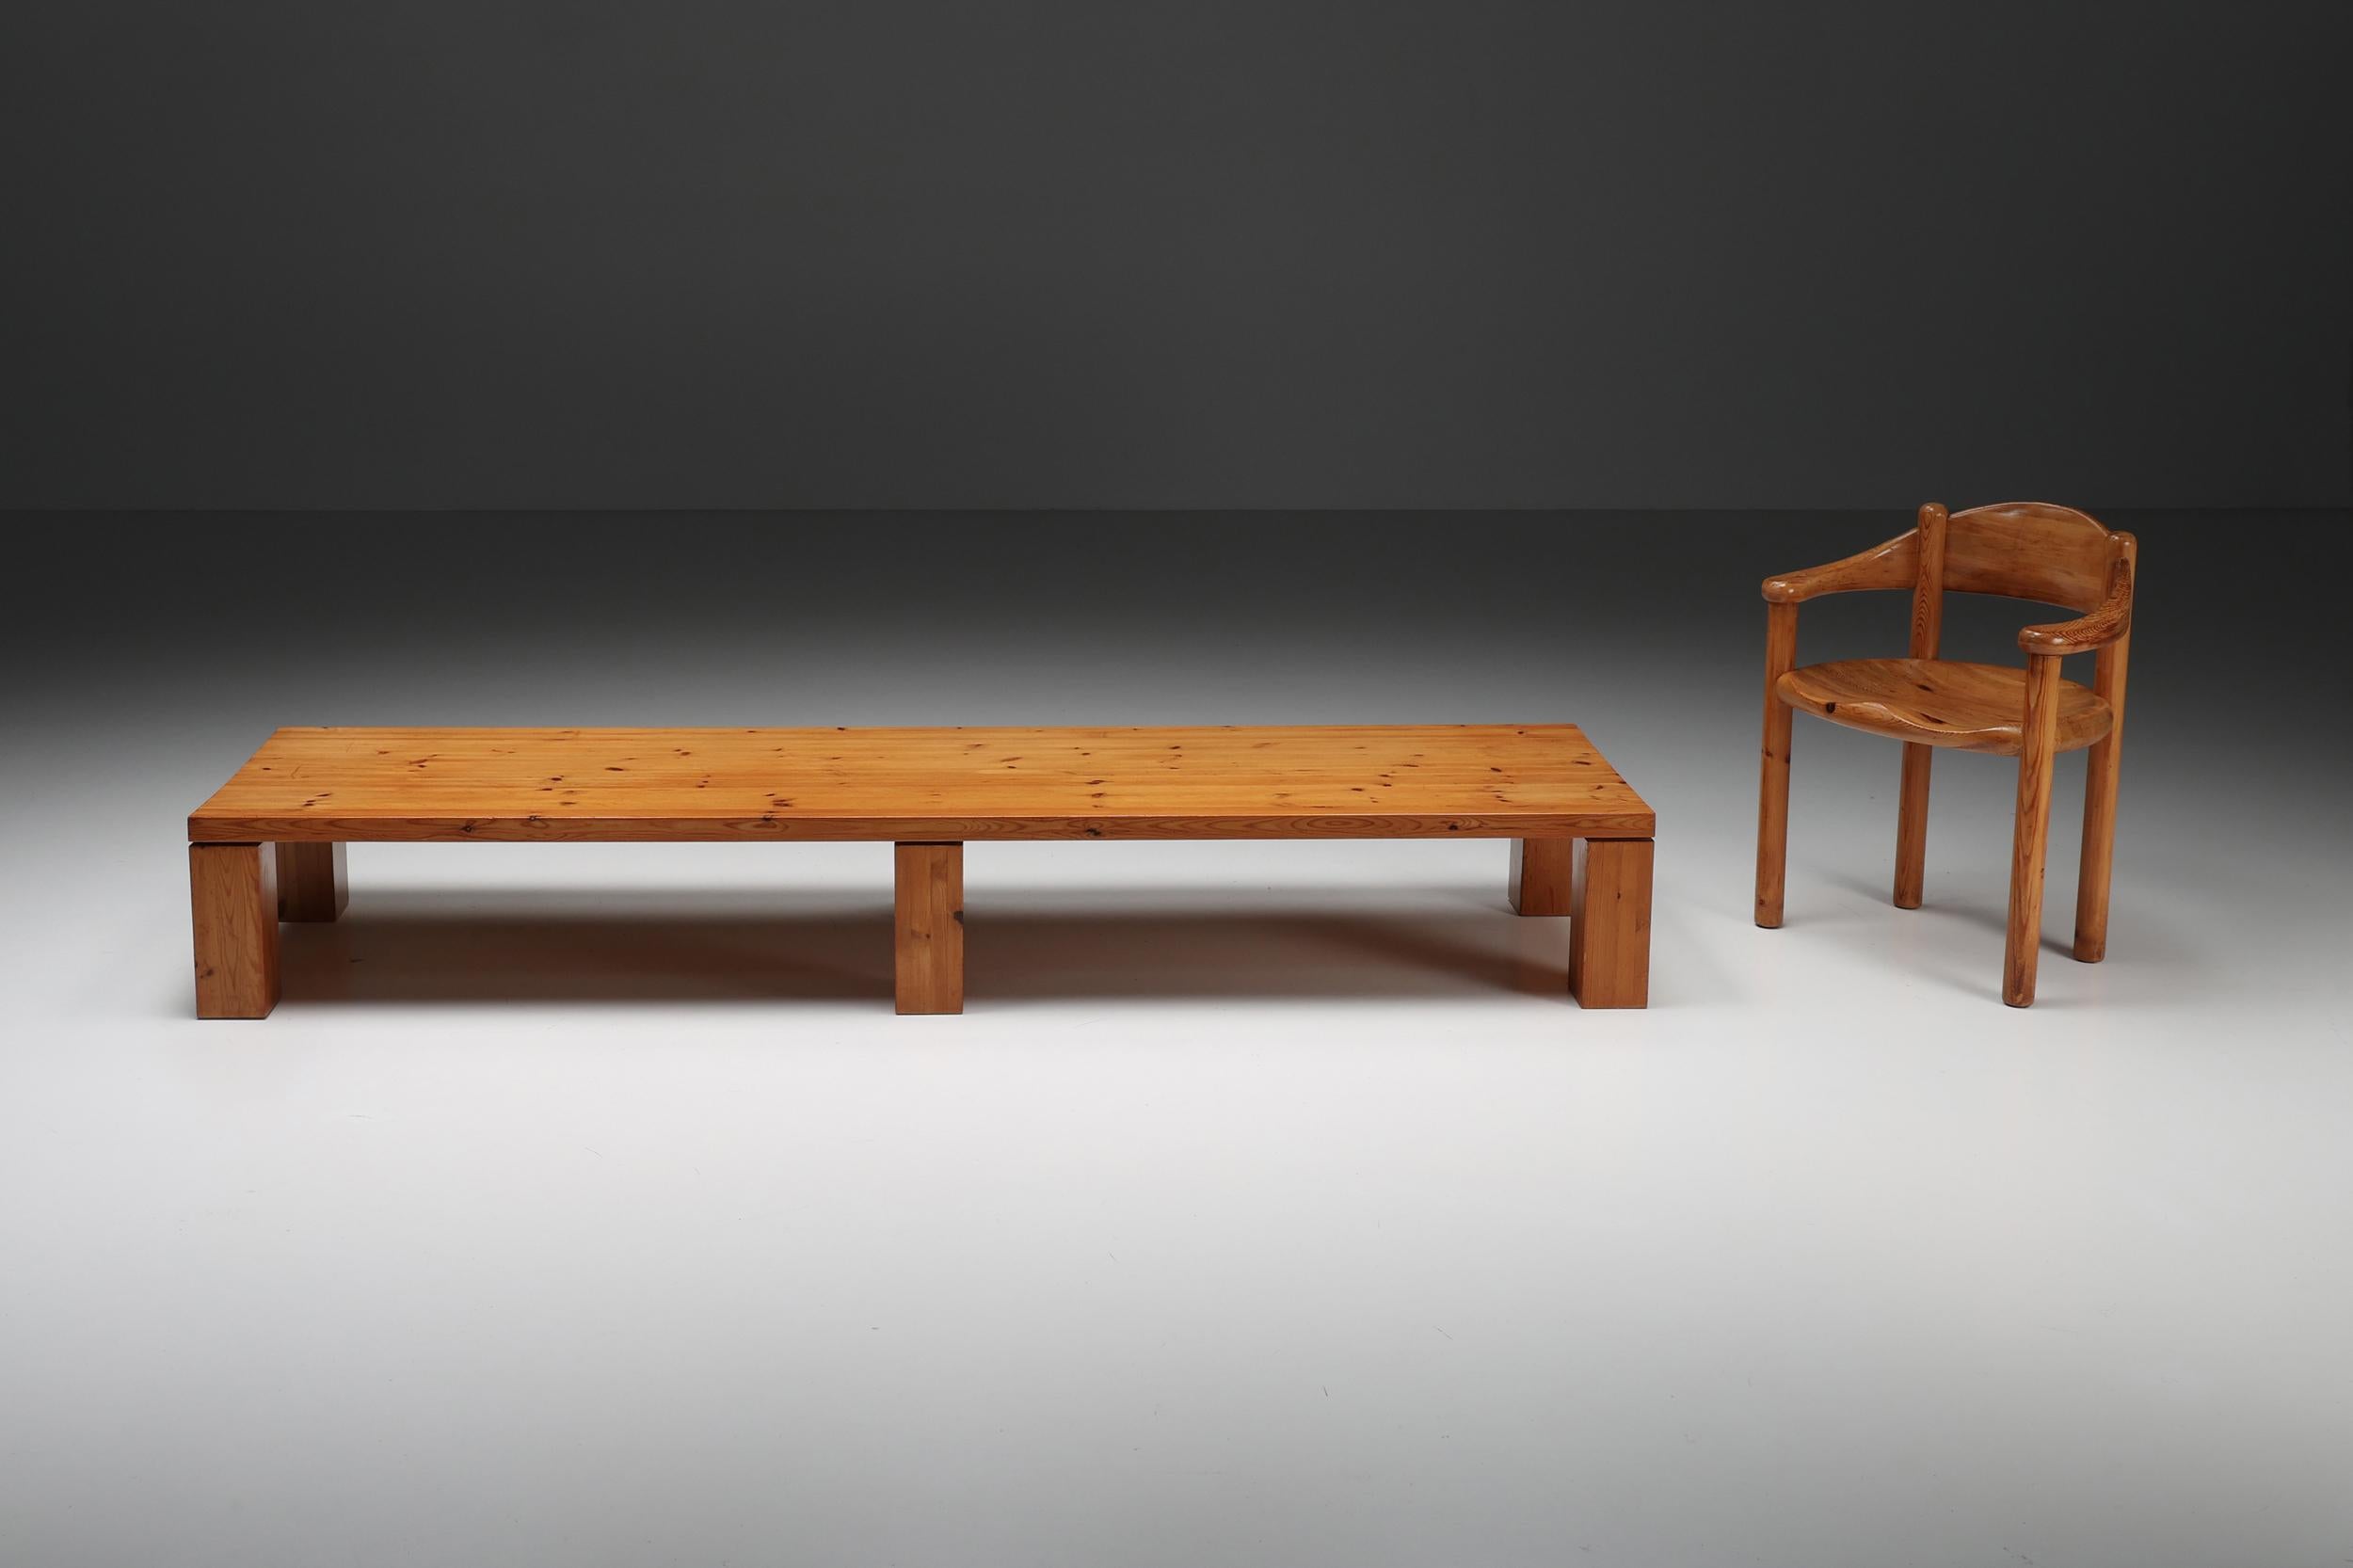 Pine Rectangular XL coffee table, bench, Mid-Century Modern, France, 1960's 

Mid-Century Modern six-legged rectangular coffee table or bench in solid pine wood. The remarkable wooden grain pattern is what this piece is all about. Because of it's